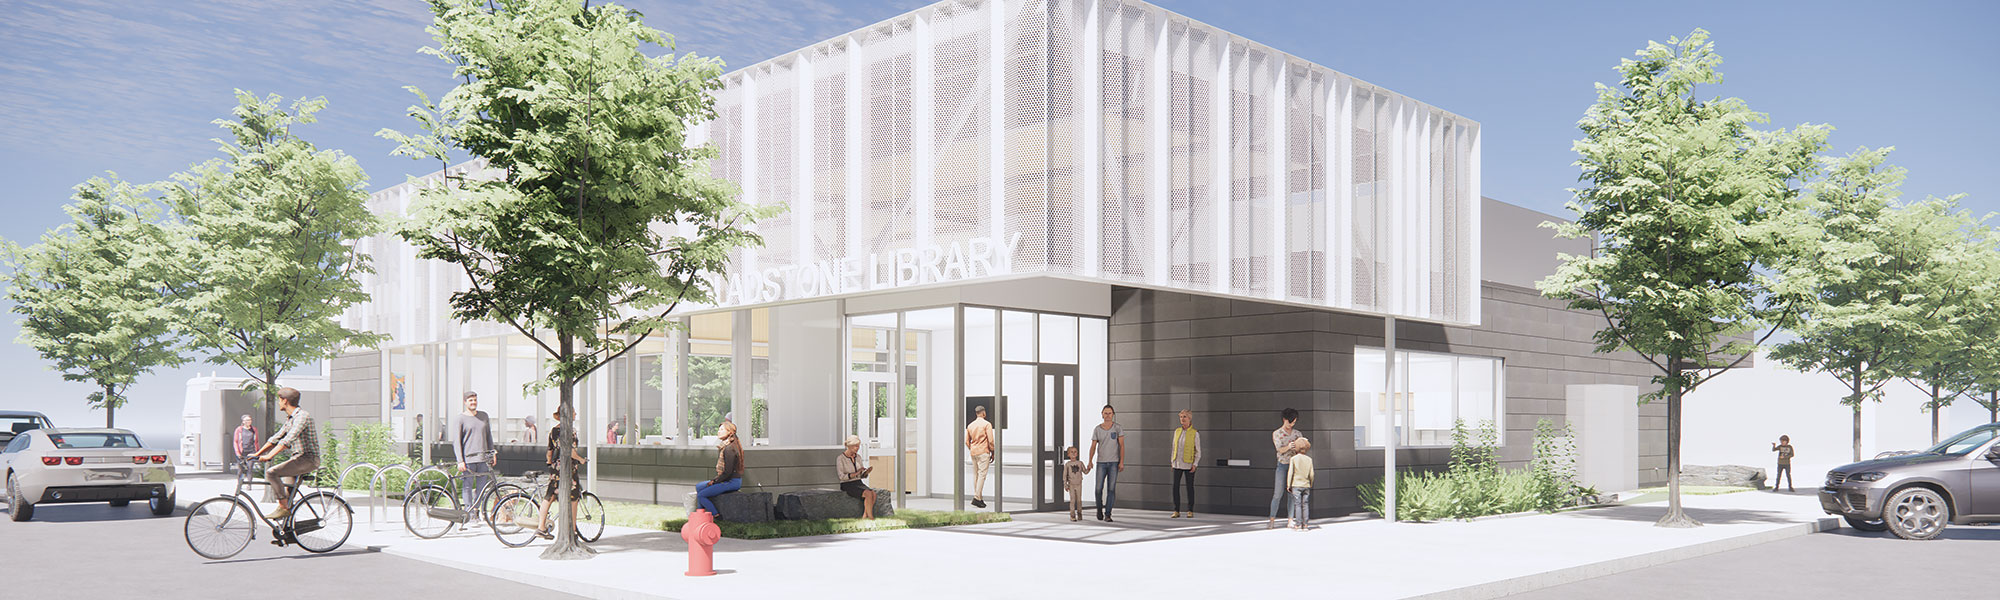 Artist rendering of the future Gladstone Library